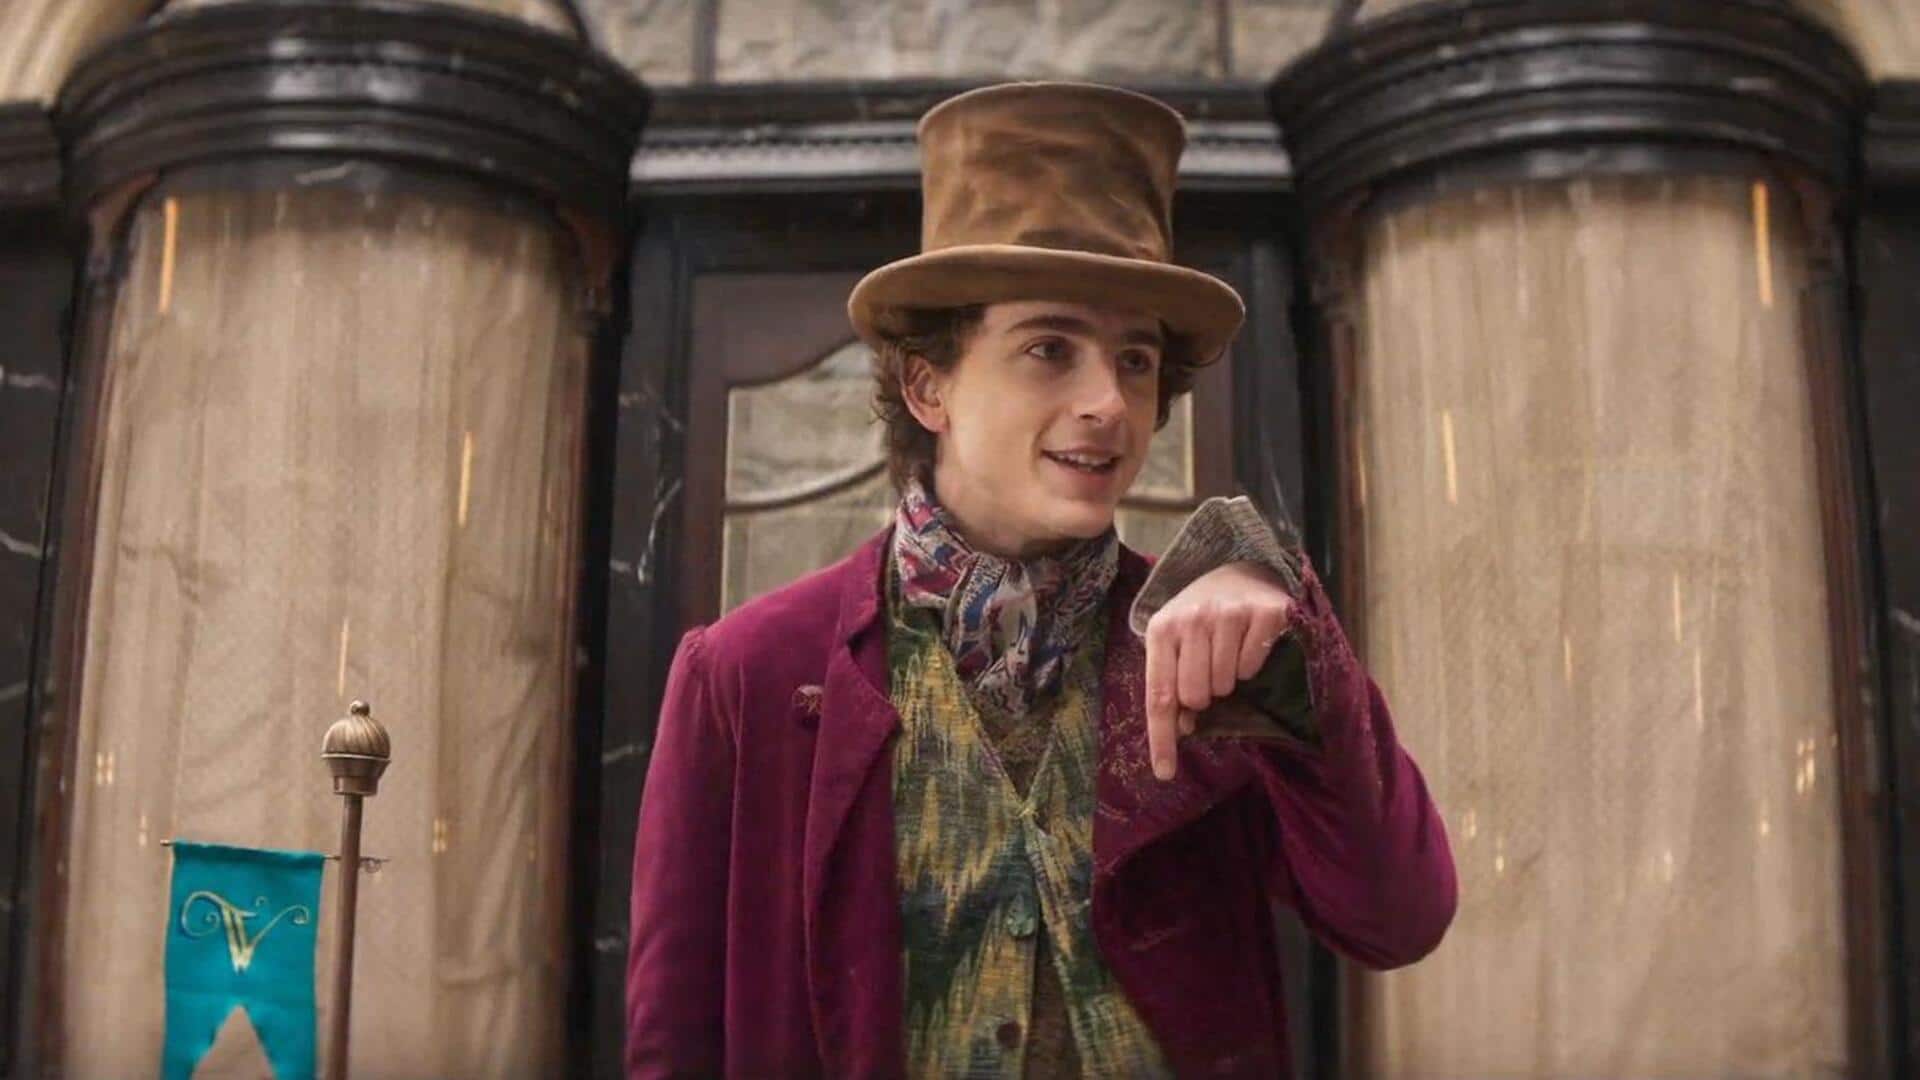 Box office collection: Timothée Chalamet's 'Wonka' earns $43.2M globally